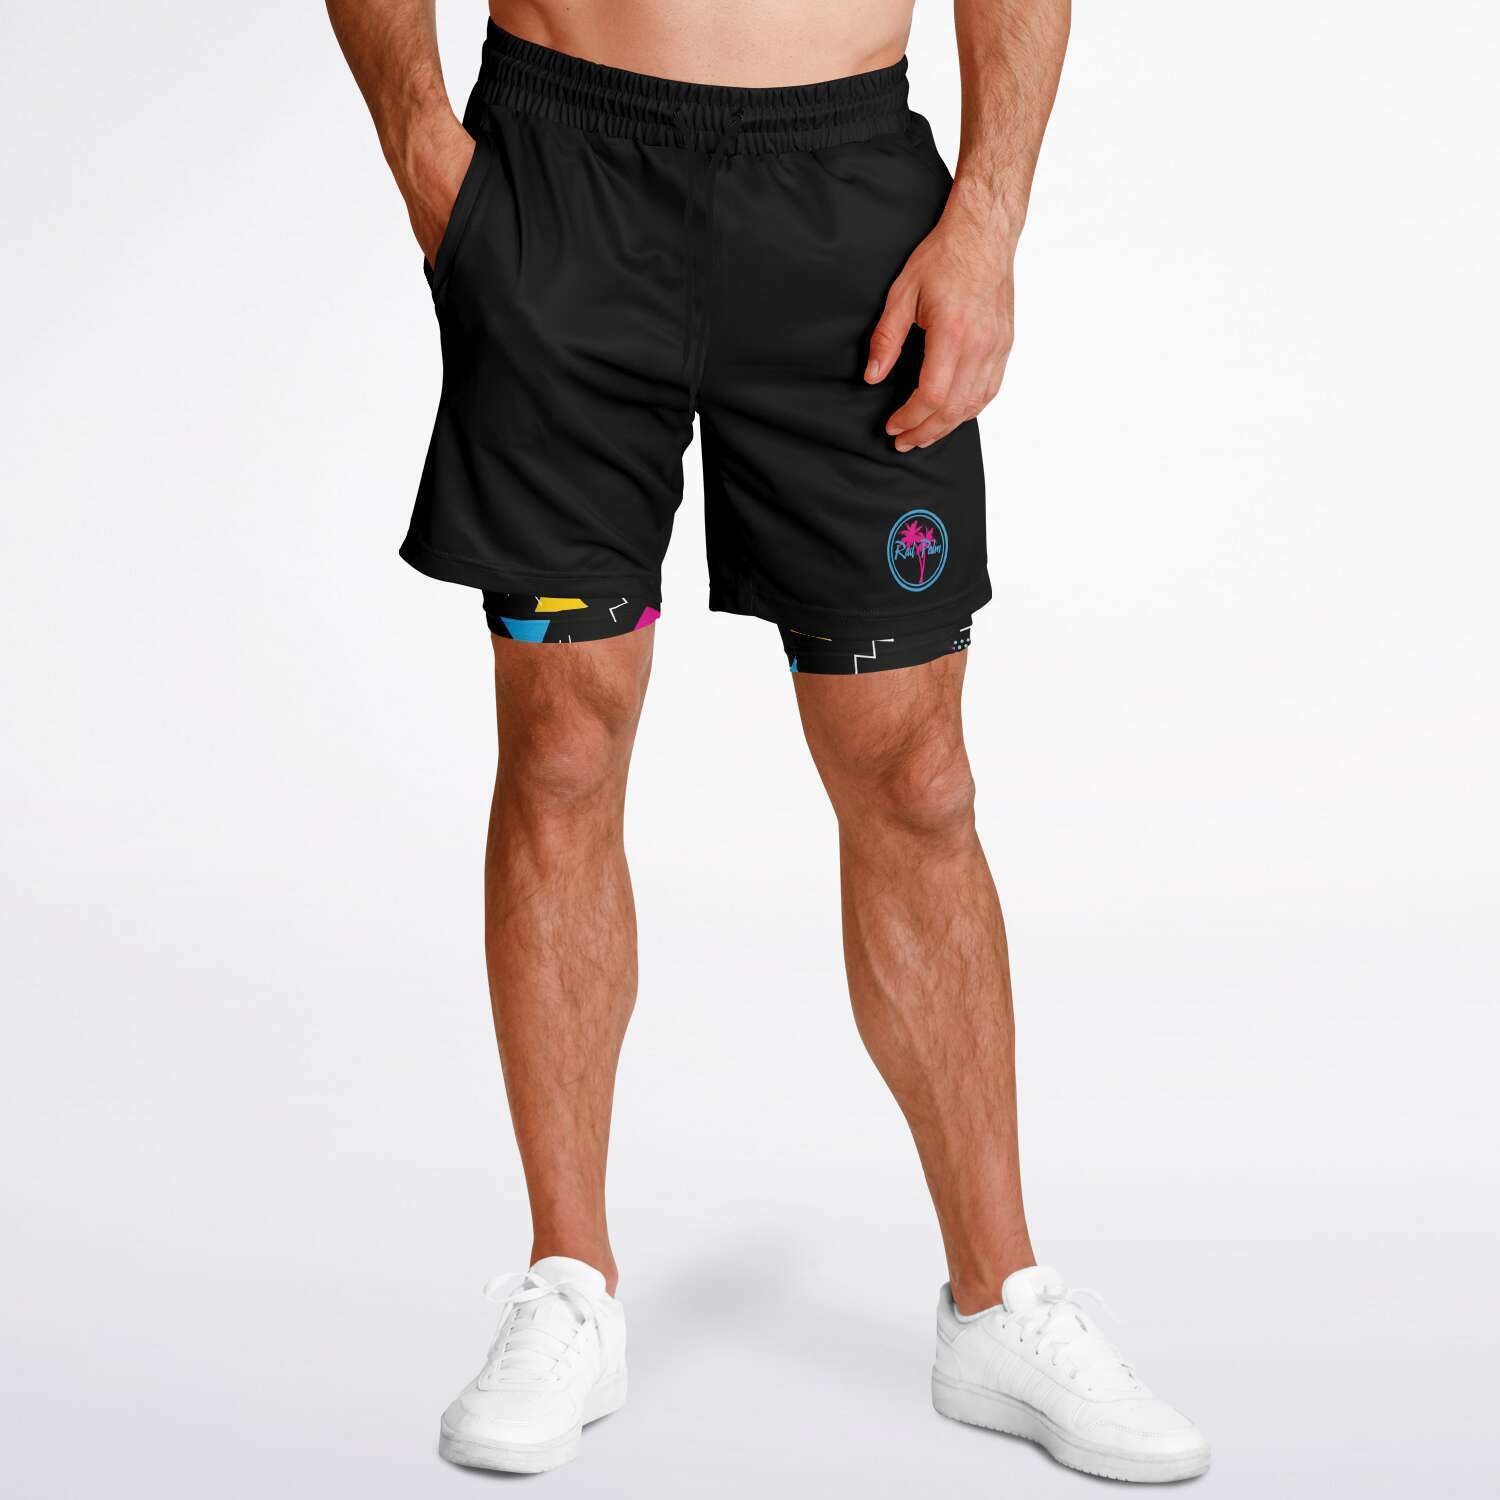 Rad Palm Saved By The Bell Men's 2-in-1 Shorts